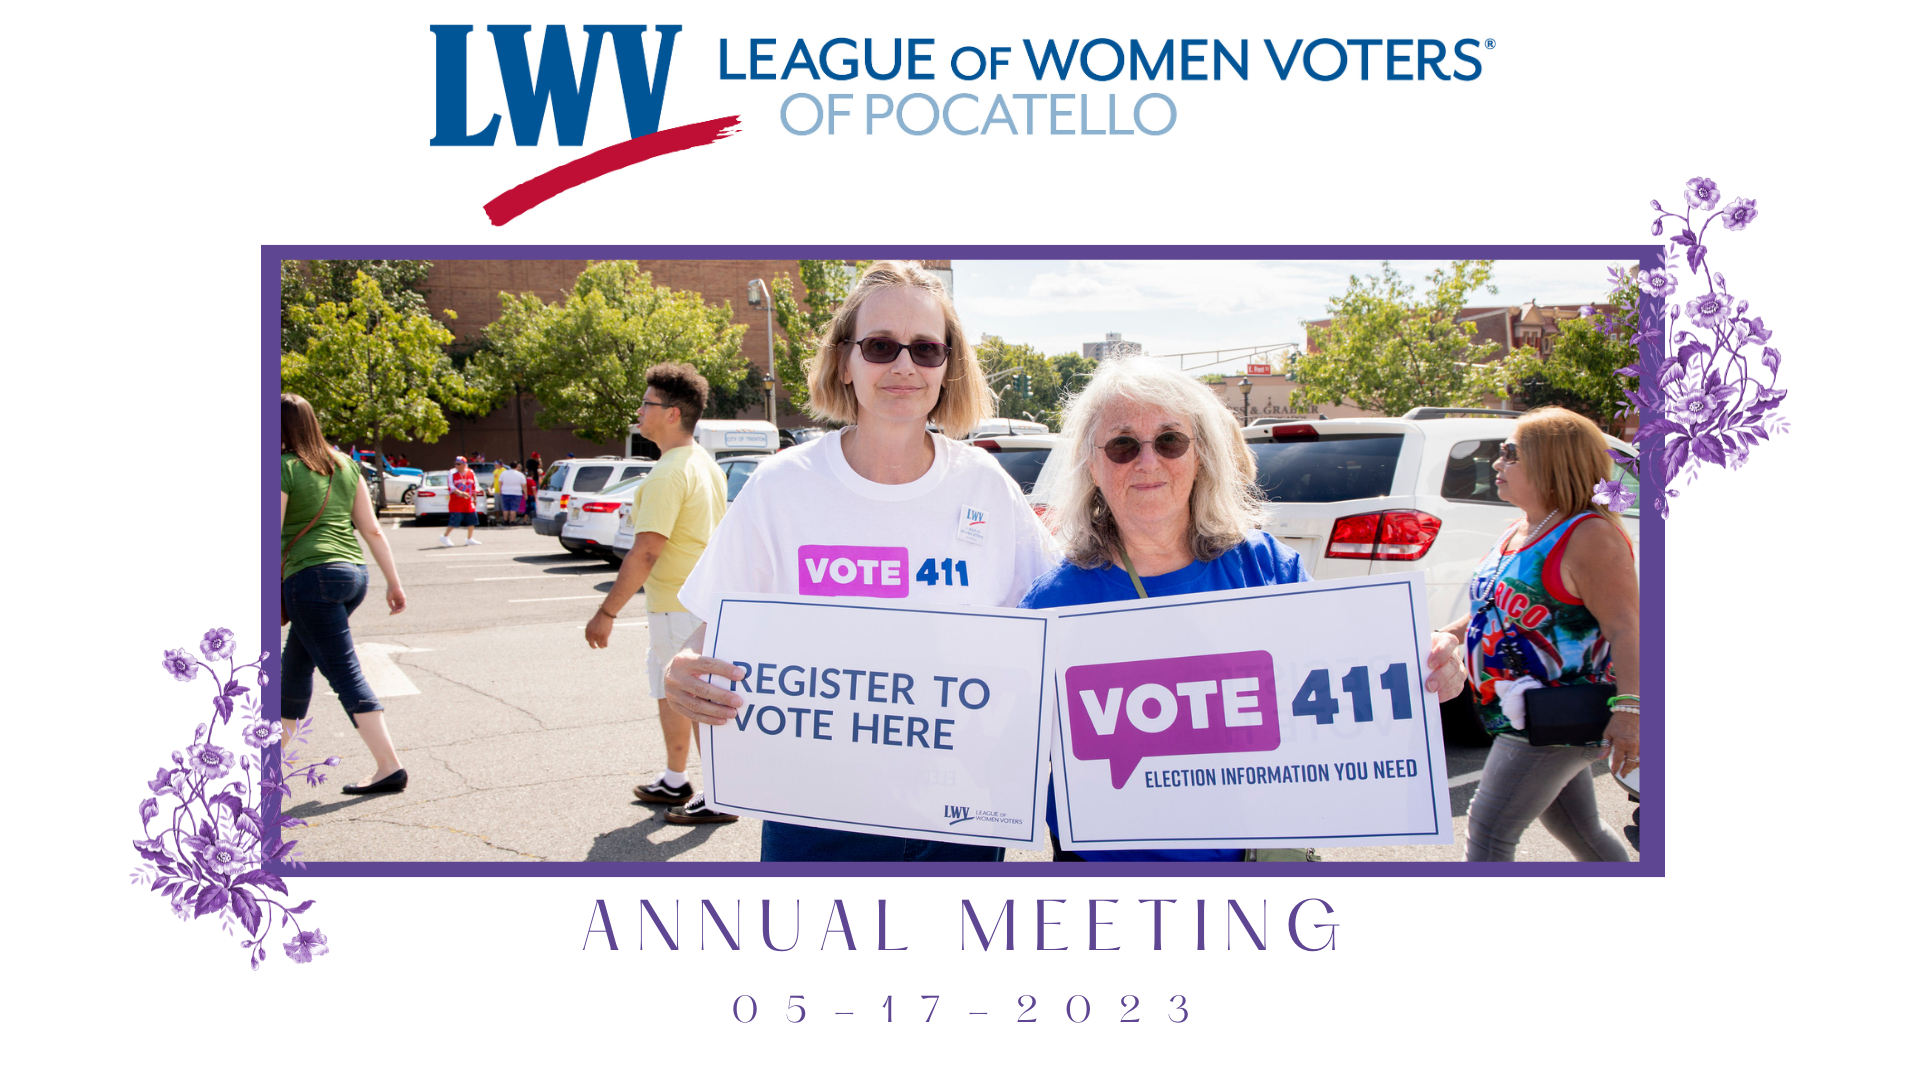 2023 League of Women Voters of Pocatello annual meeting